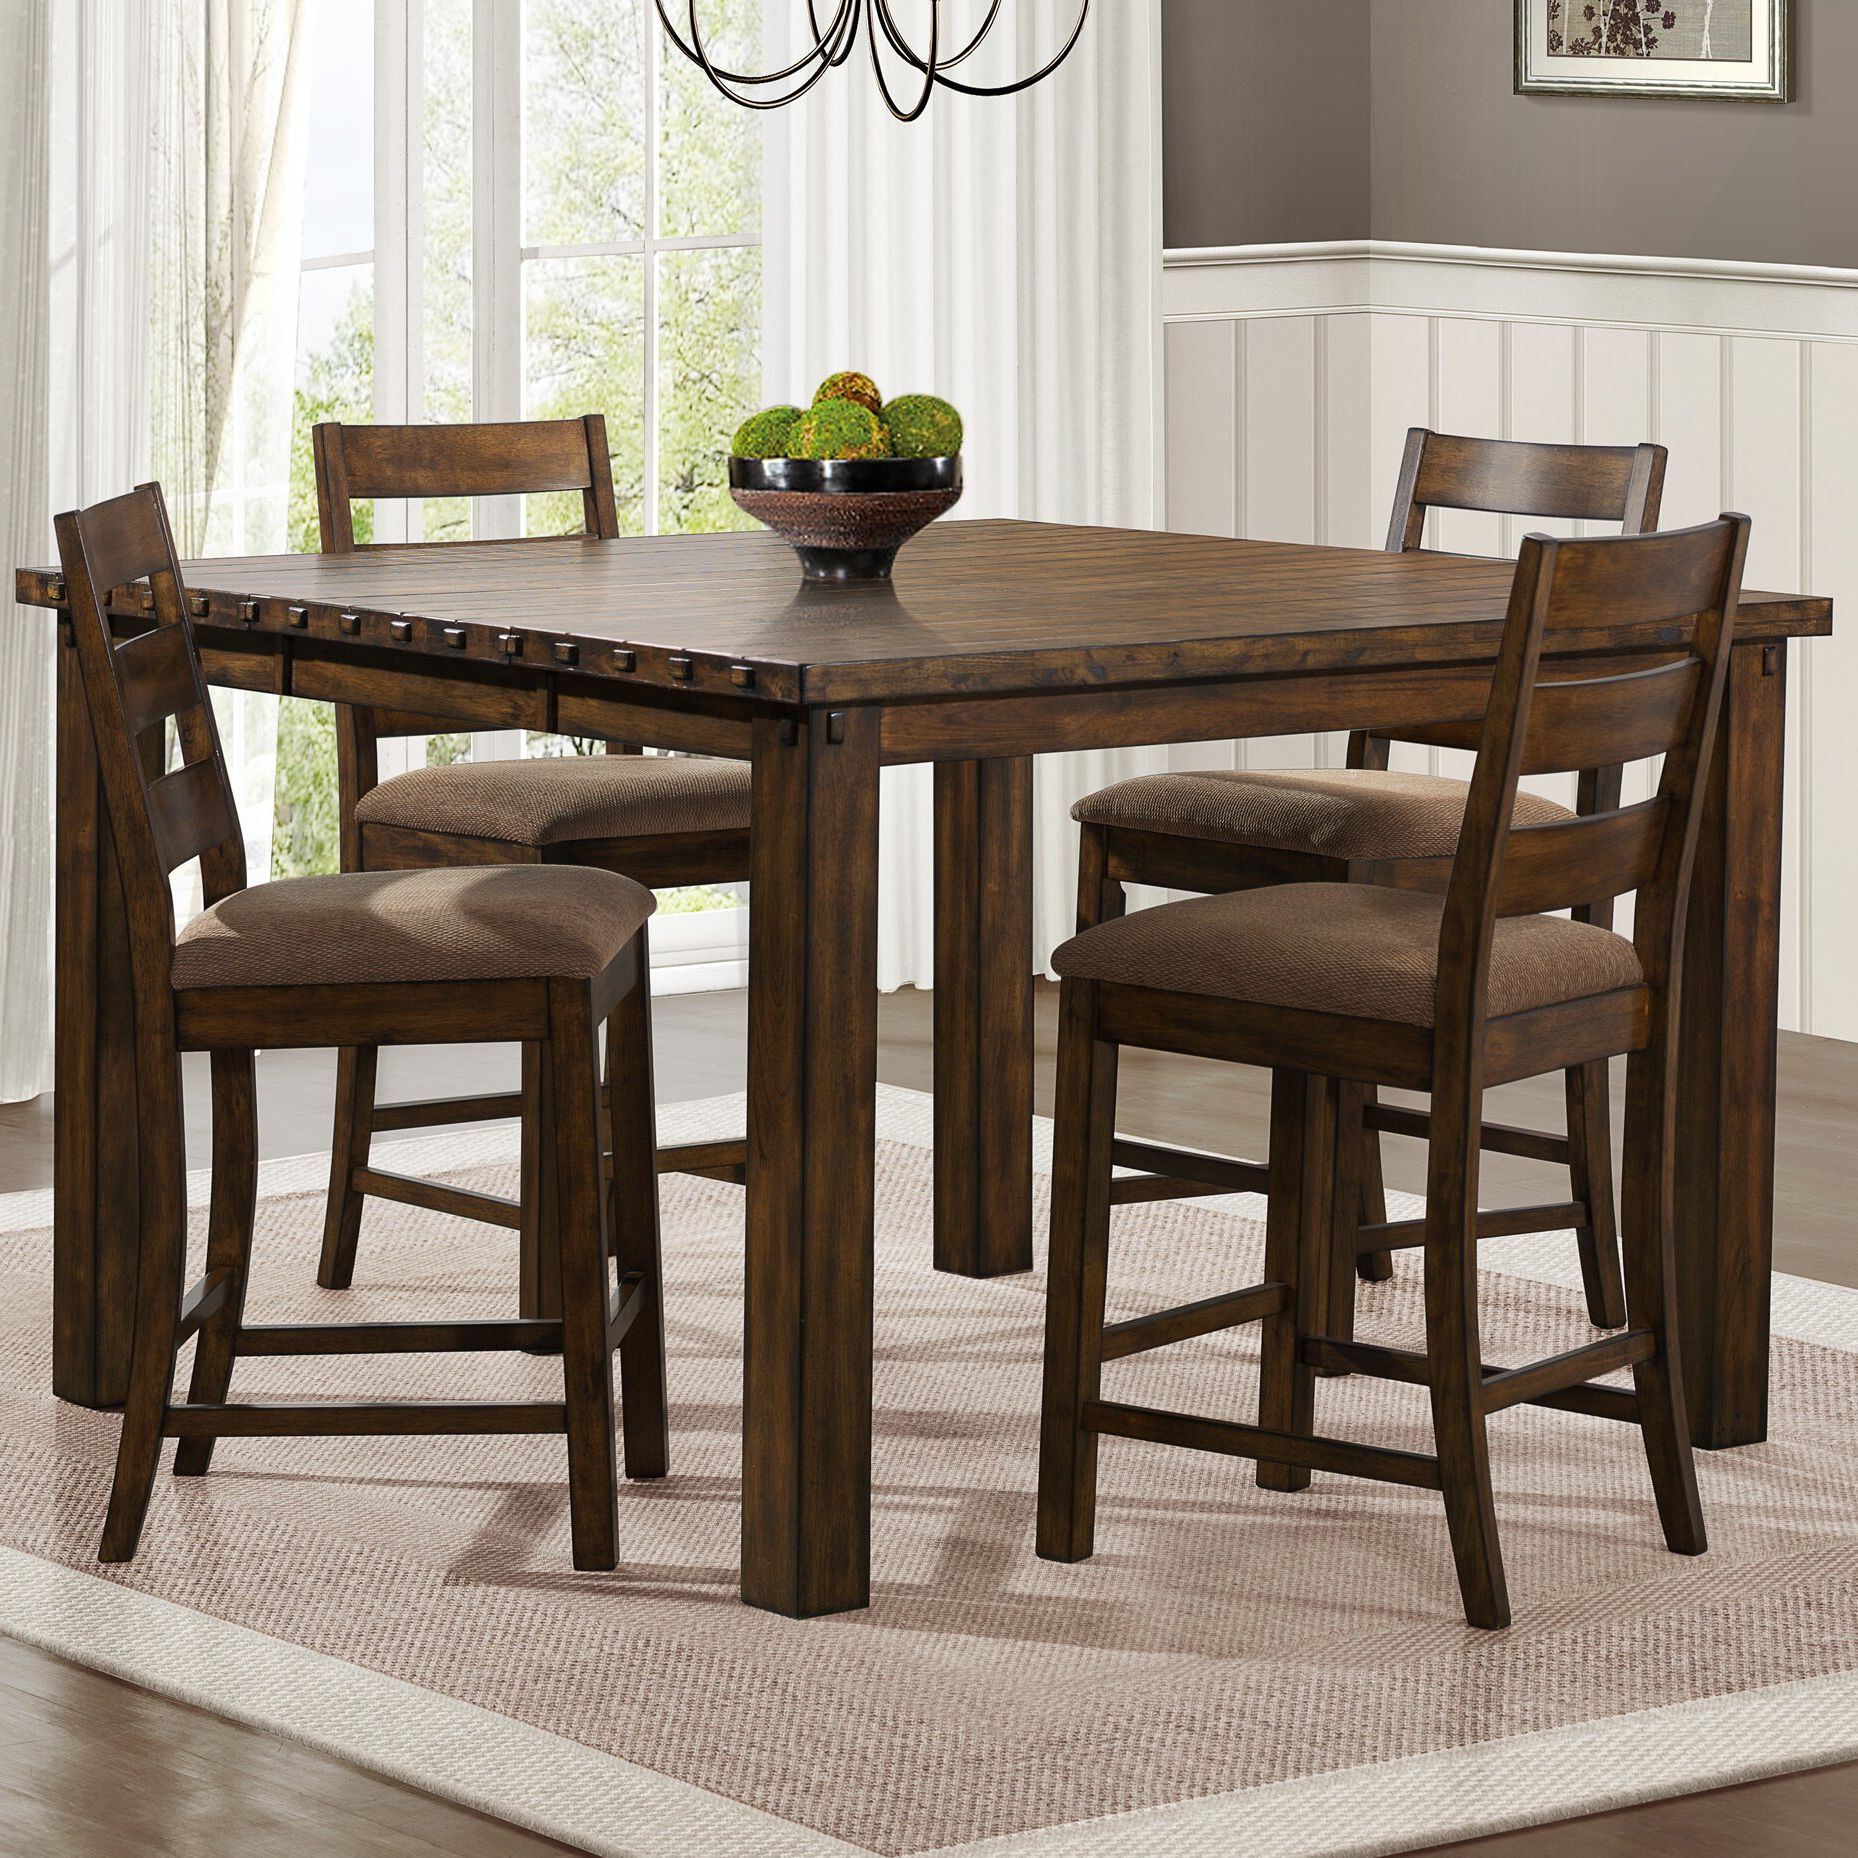 Romriell Bar Height Trestle Dining Tables Throughout Most Recent Woodhaven Hill Ronan Counter Height Extendable Dining (View 11 of 20)